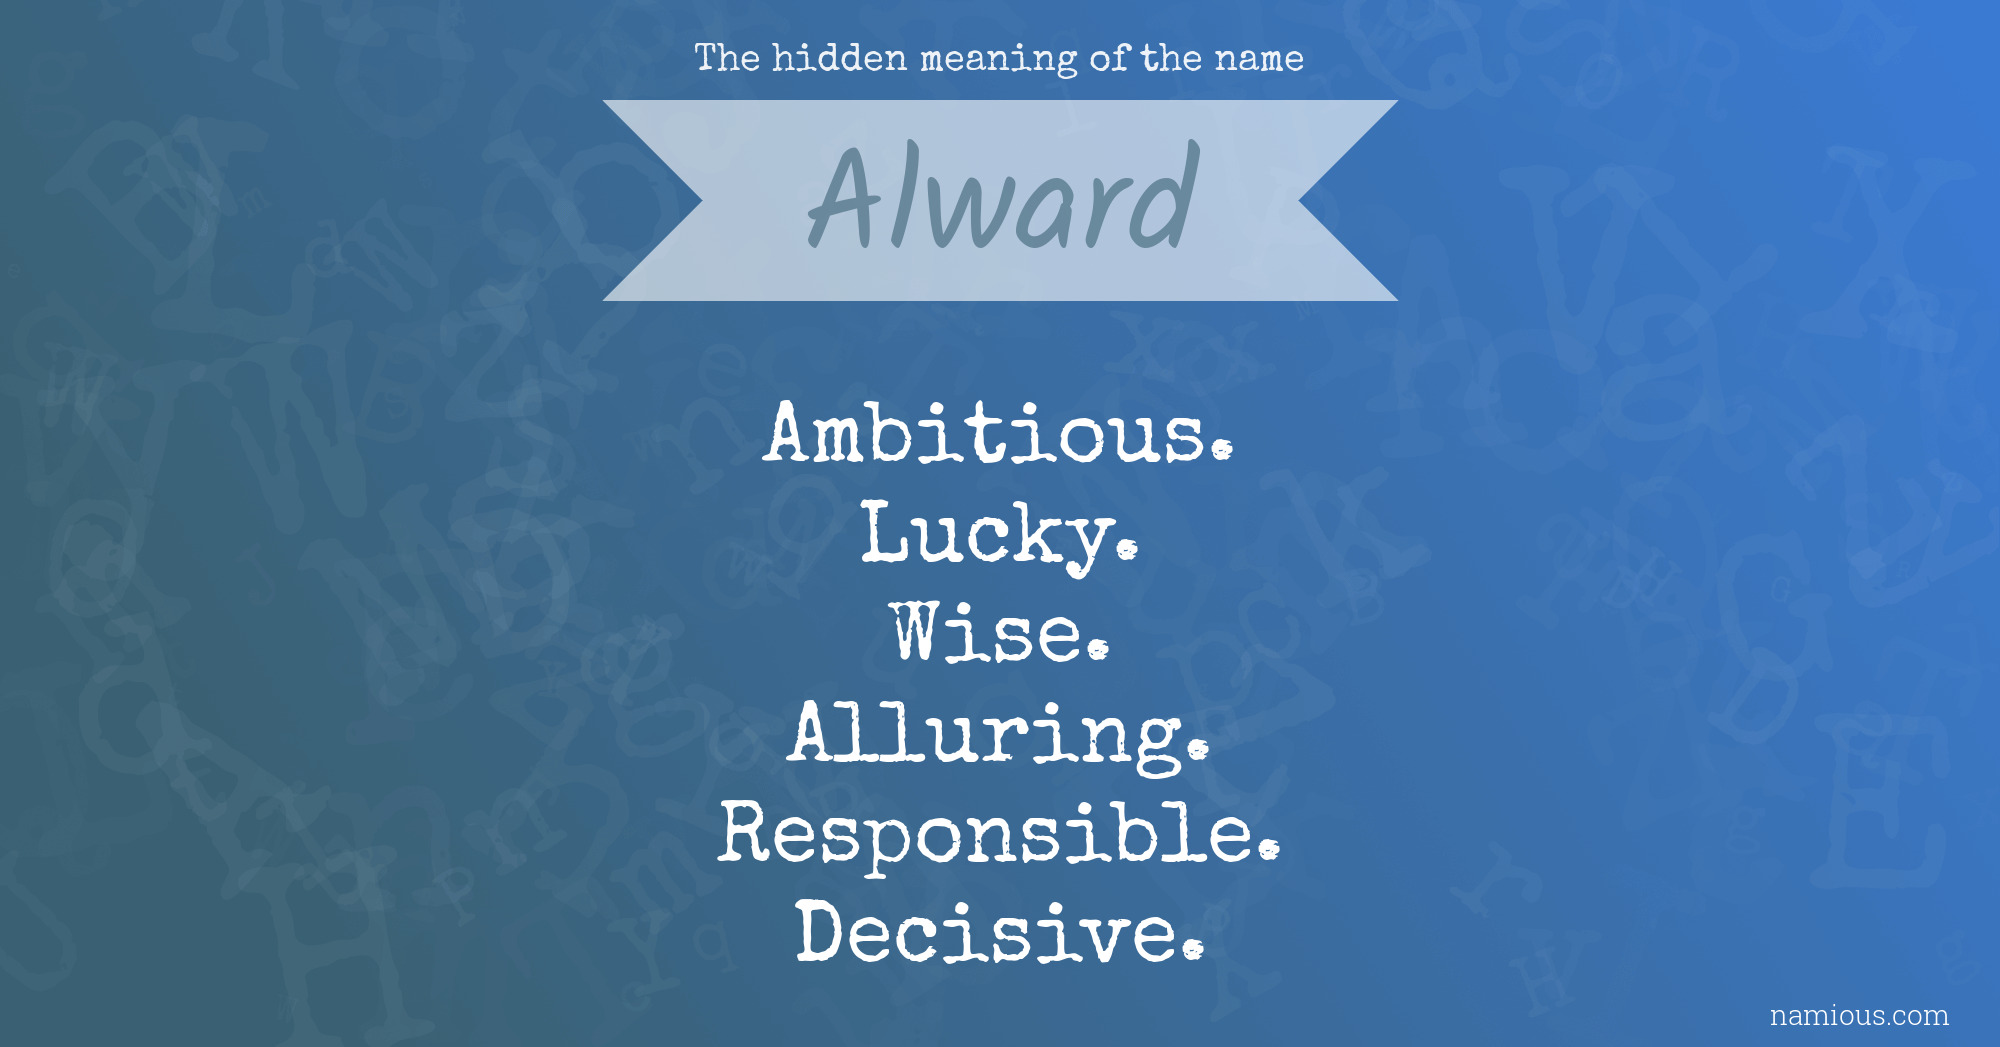 The hidden meaning of the name Alward